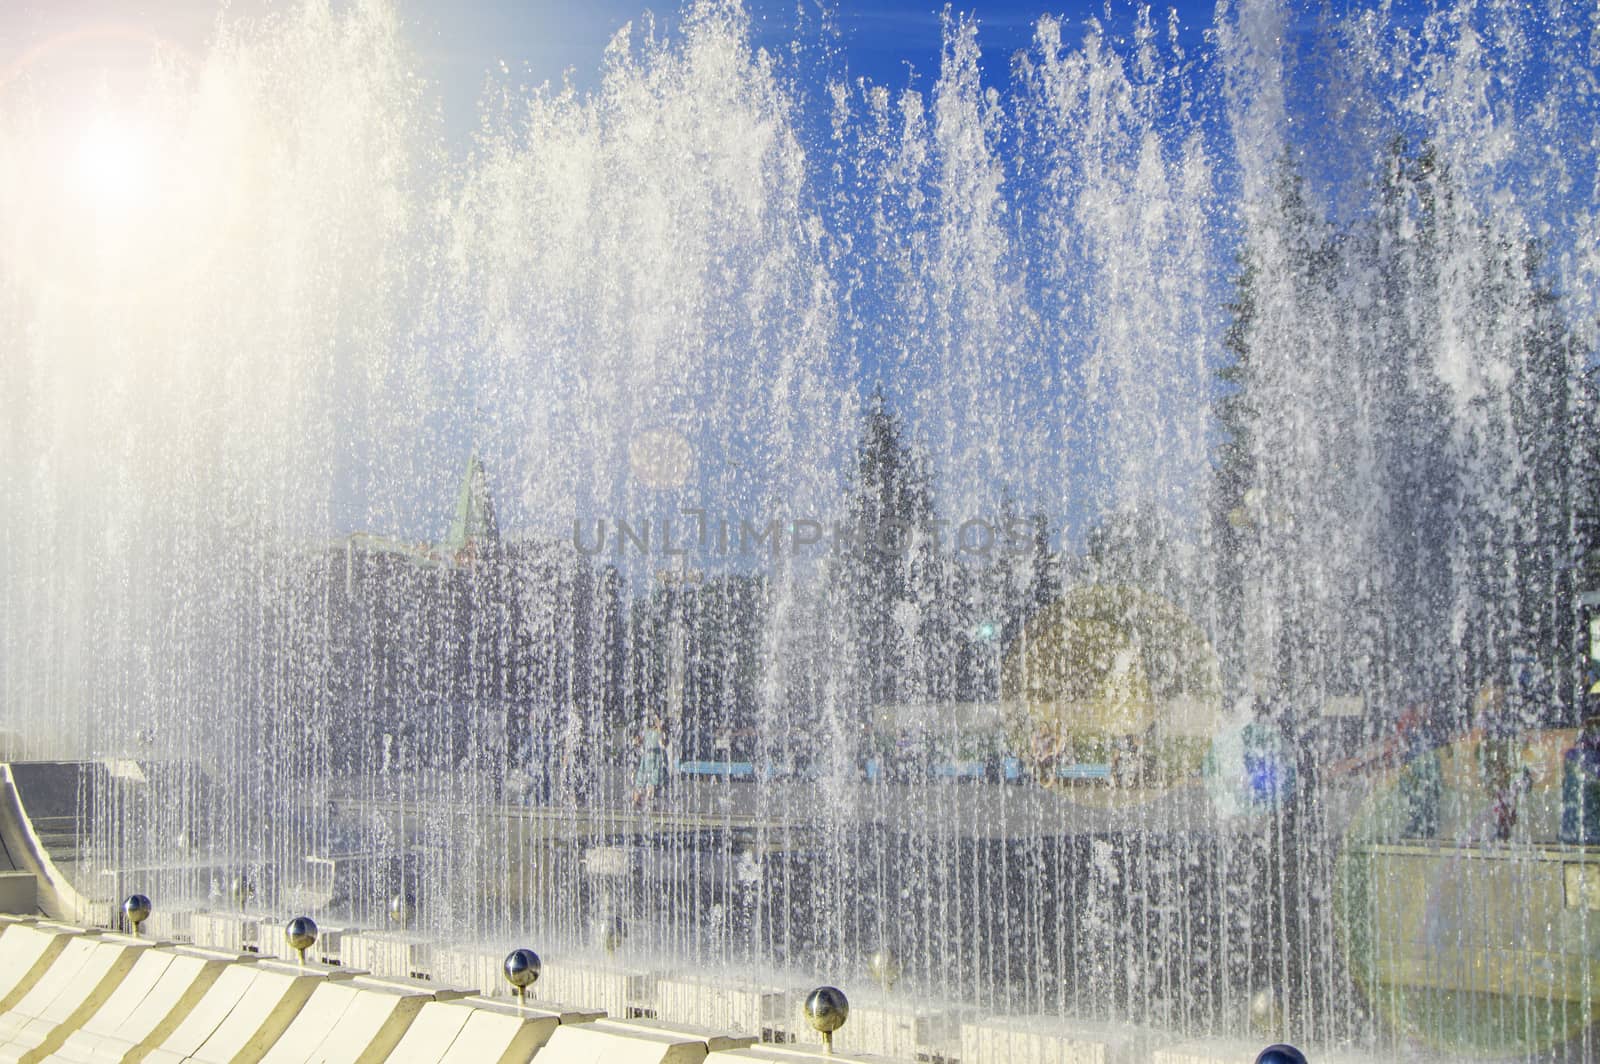 City fountain with water jets and random people, view through splashes on Sunny summer day.